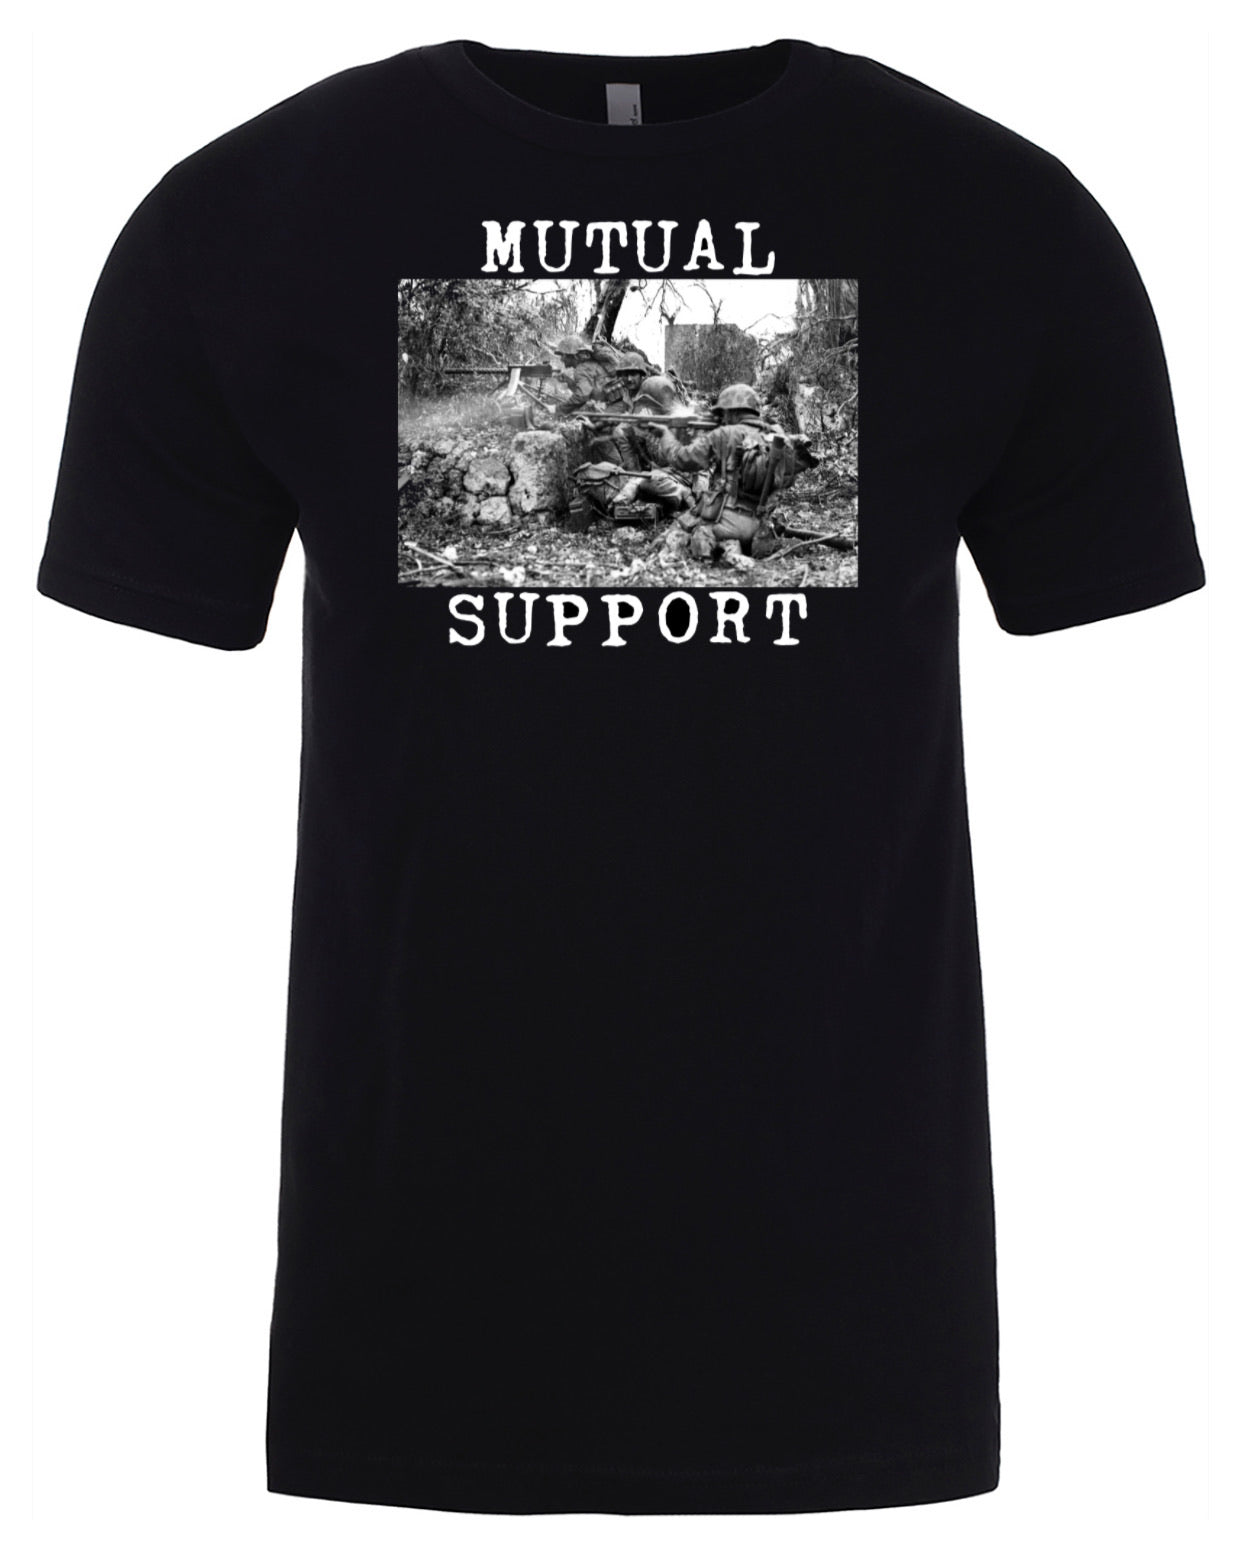 Mutual Support Tee